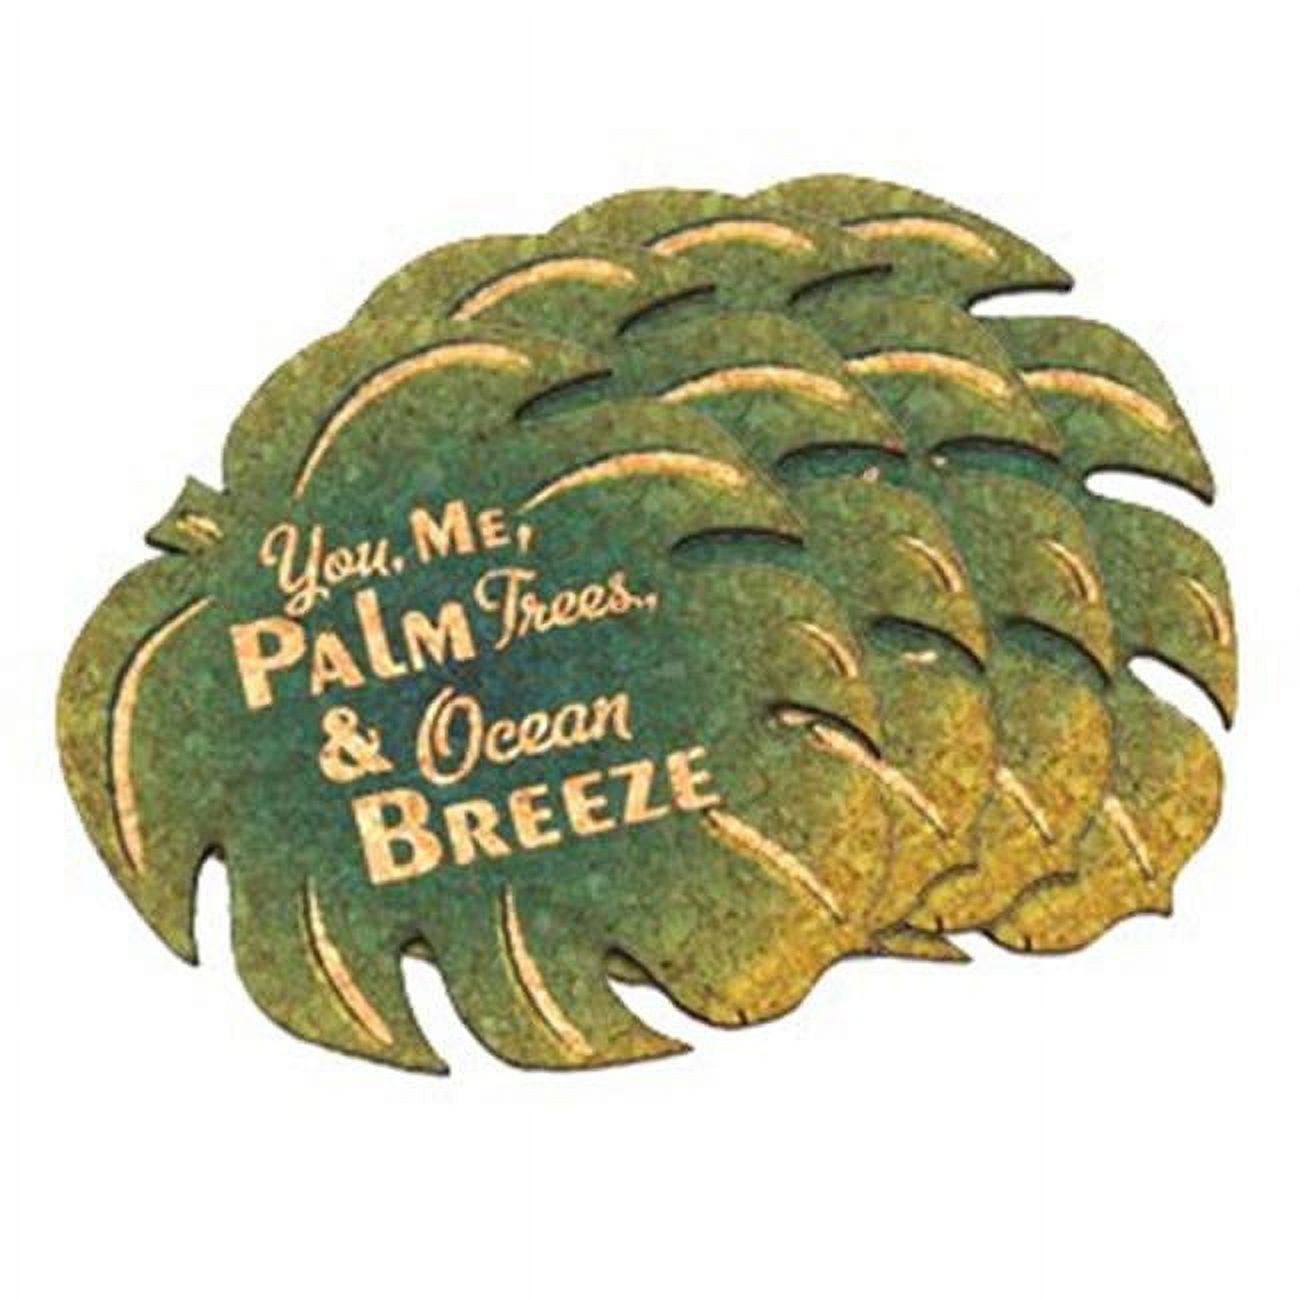 Picture of Ducky Days 8497190 4 x 4 in. You Me Palm Trees Ocean Breeze Palm Leaf Cork Coaster Wedding Favors - Set of 4